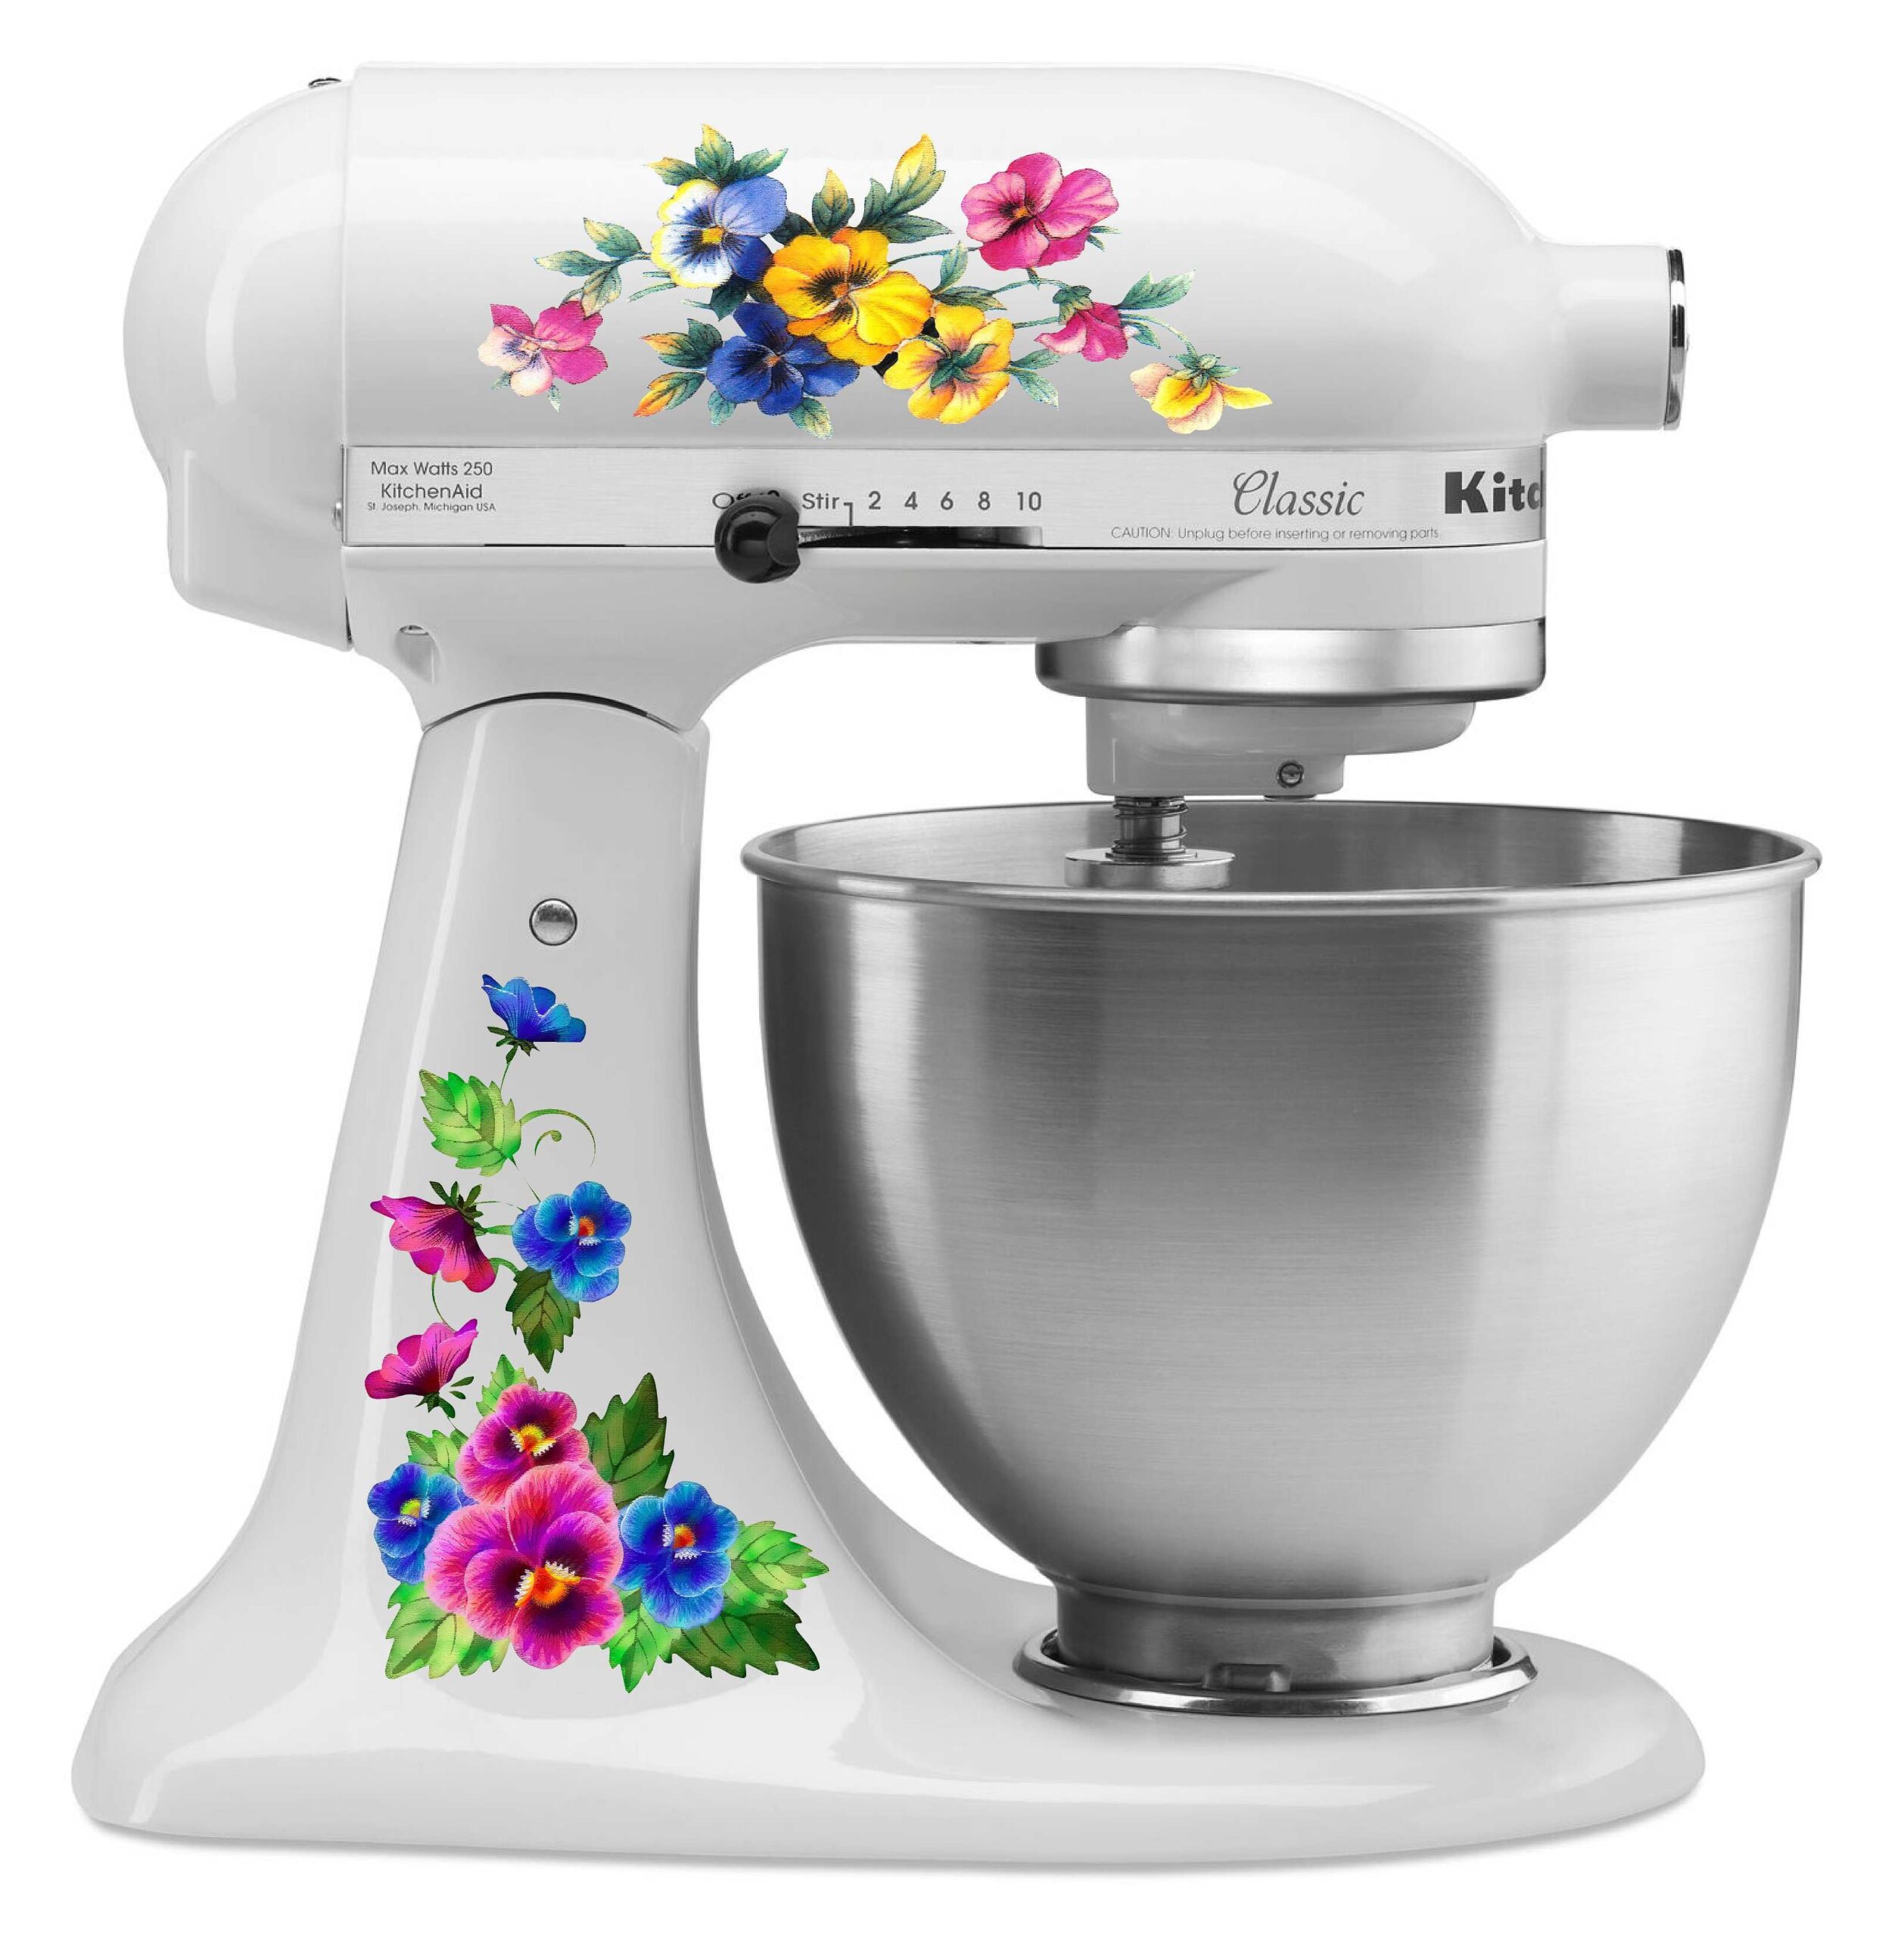 Let them Eat Cake – Cute Vinyl Decals for Kitchenaid Mixer and